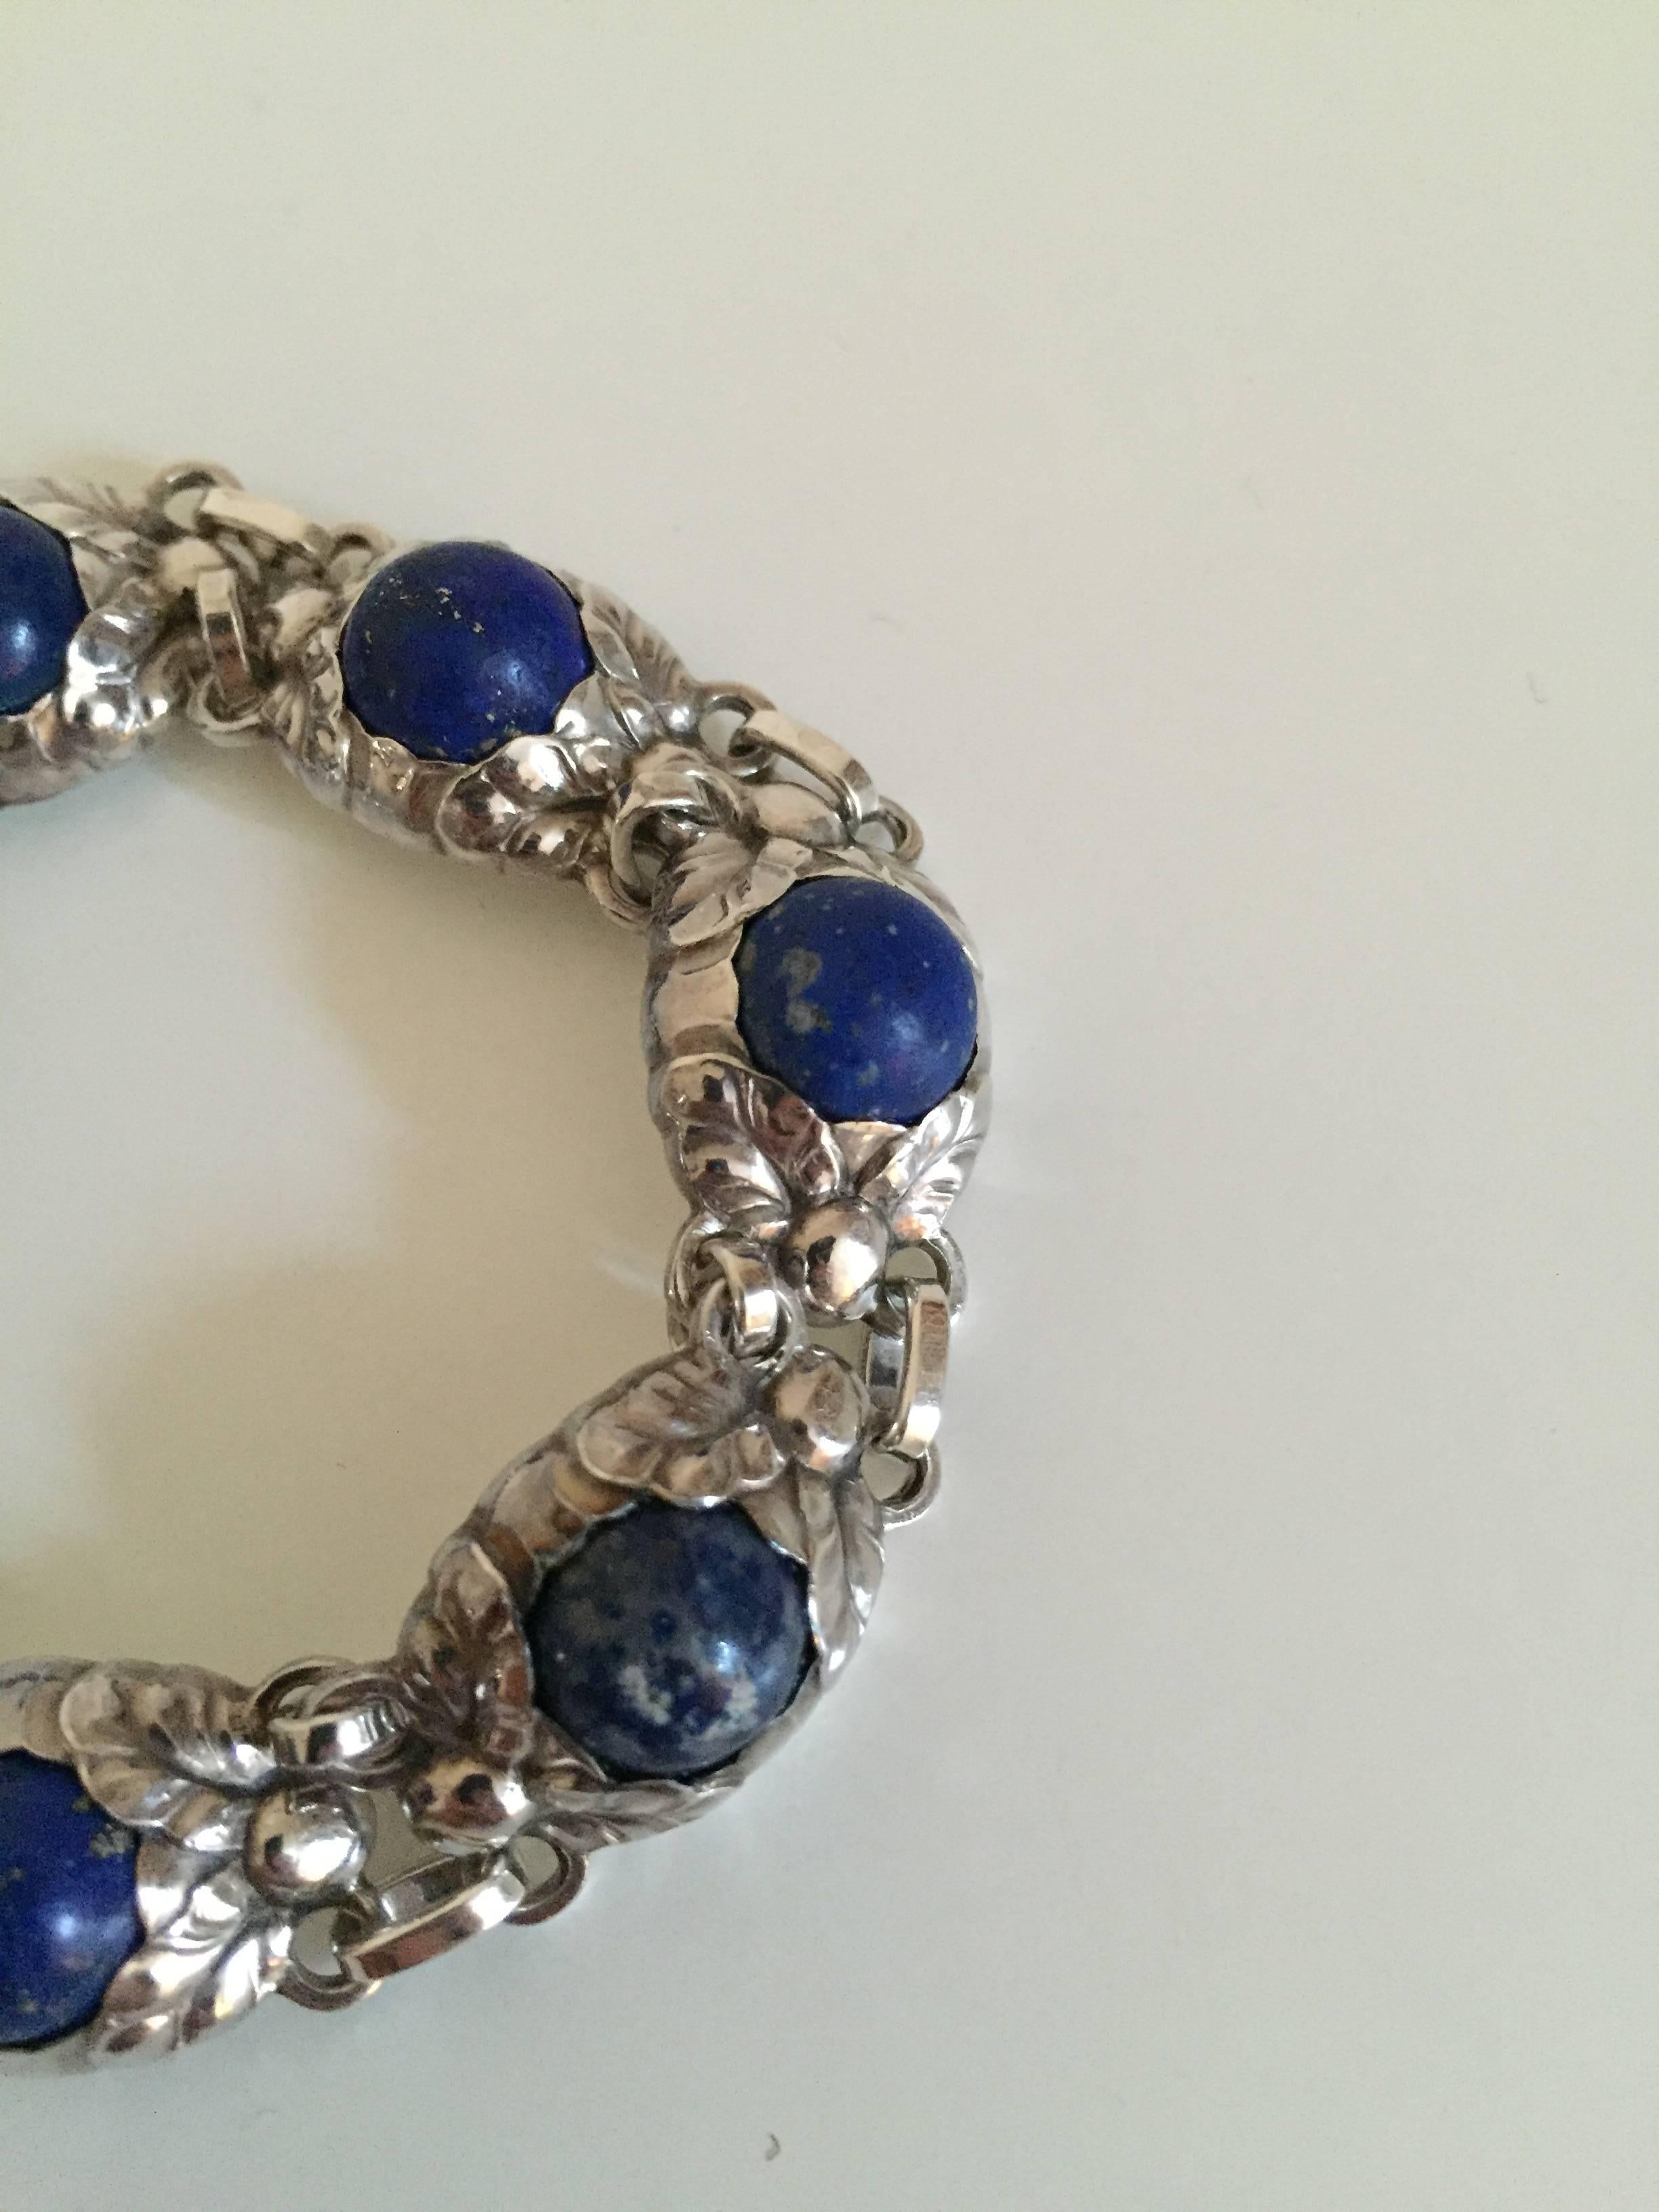 20th Century Georg Jensen Sterling Silver Bracelet with Lapis Lazuli from 1945-1951